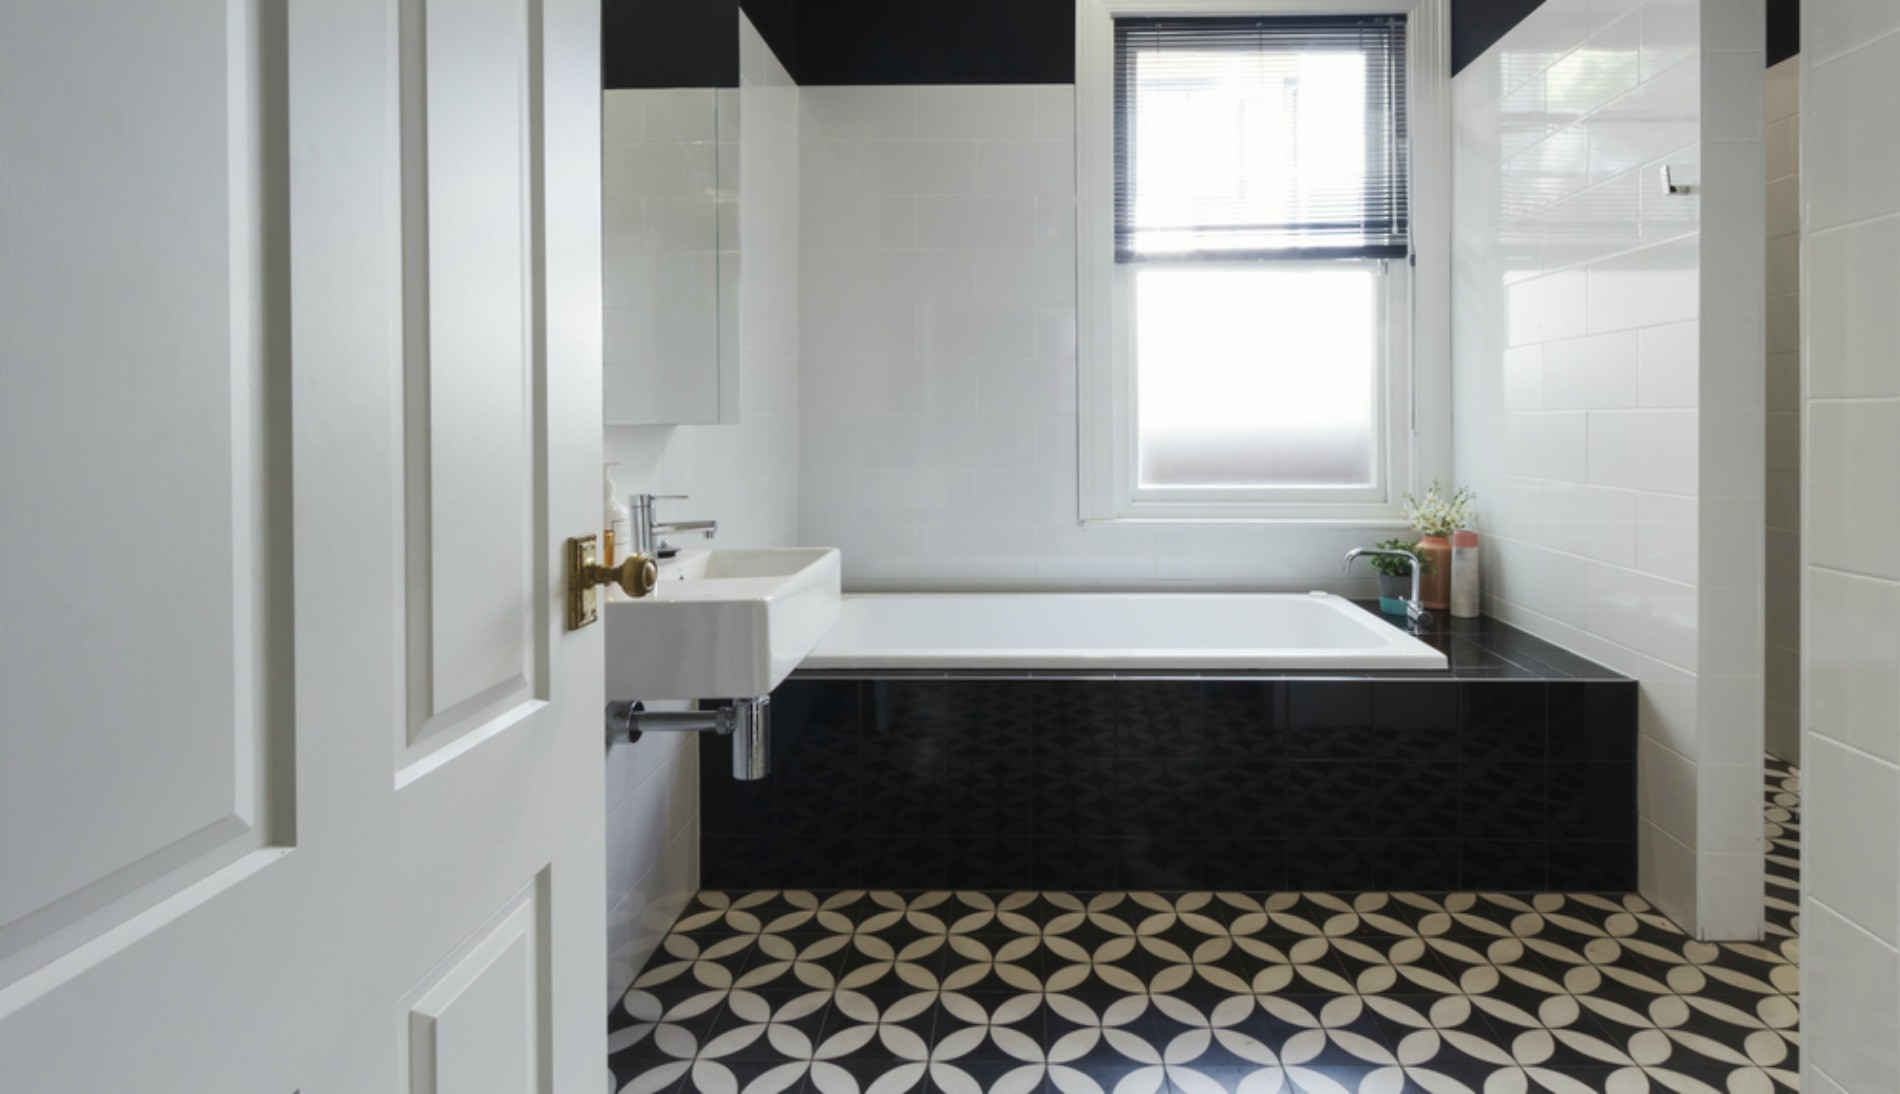 Black And White Tile Bathroom
 Bathrooms with Black and White Patterned Floor Tiles